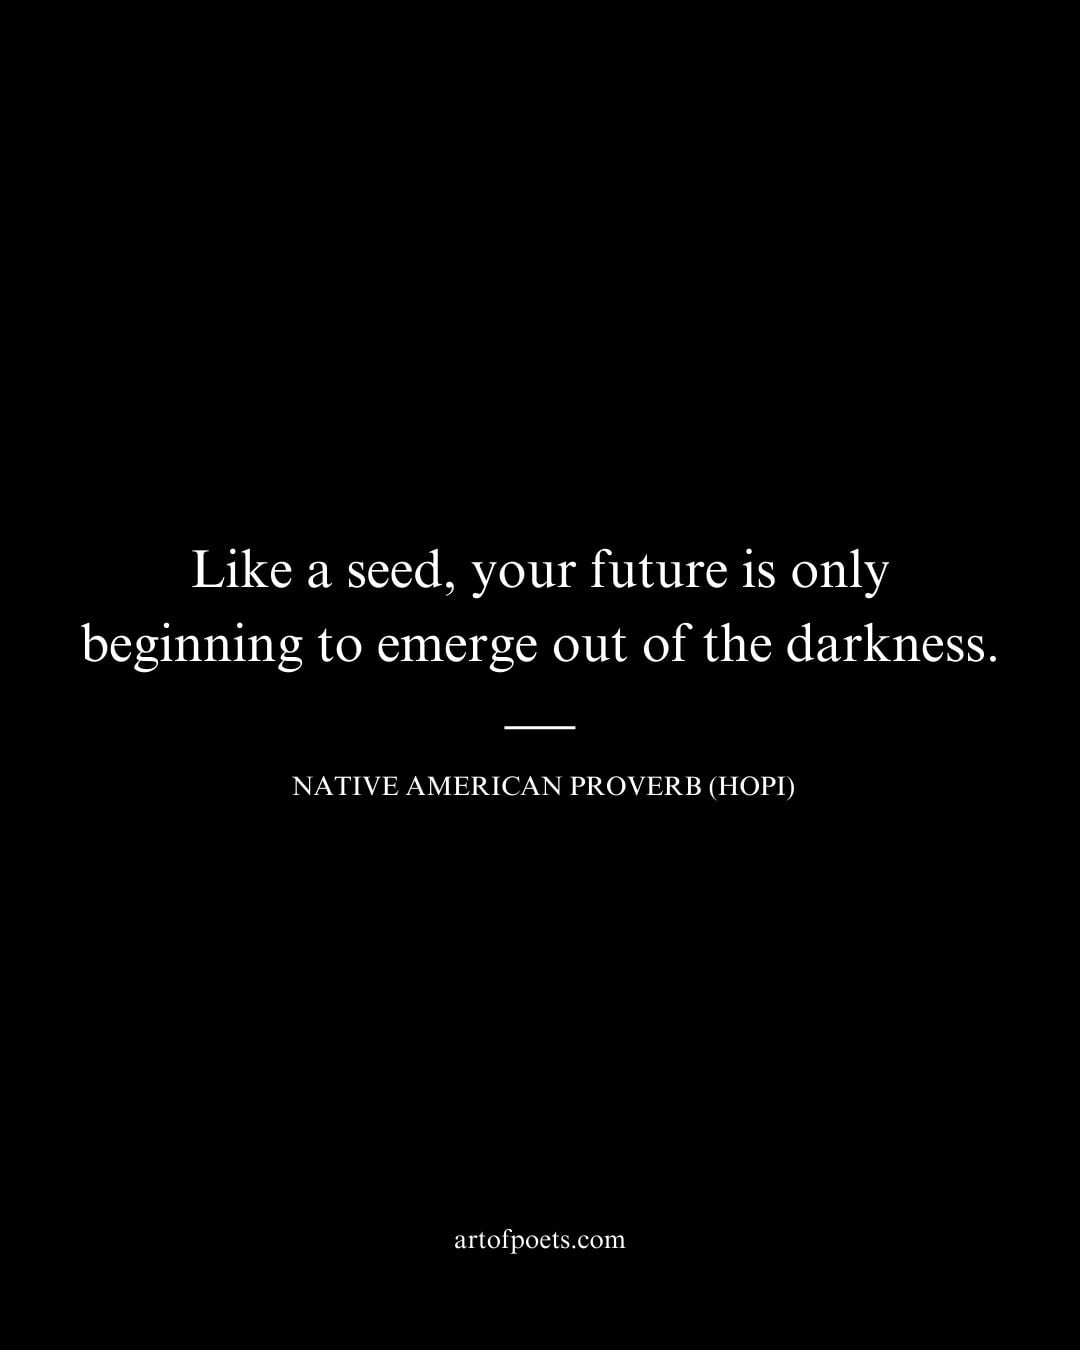 Like a seed your future is only beginning to emerge out of the darkness